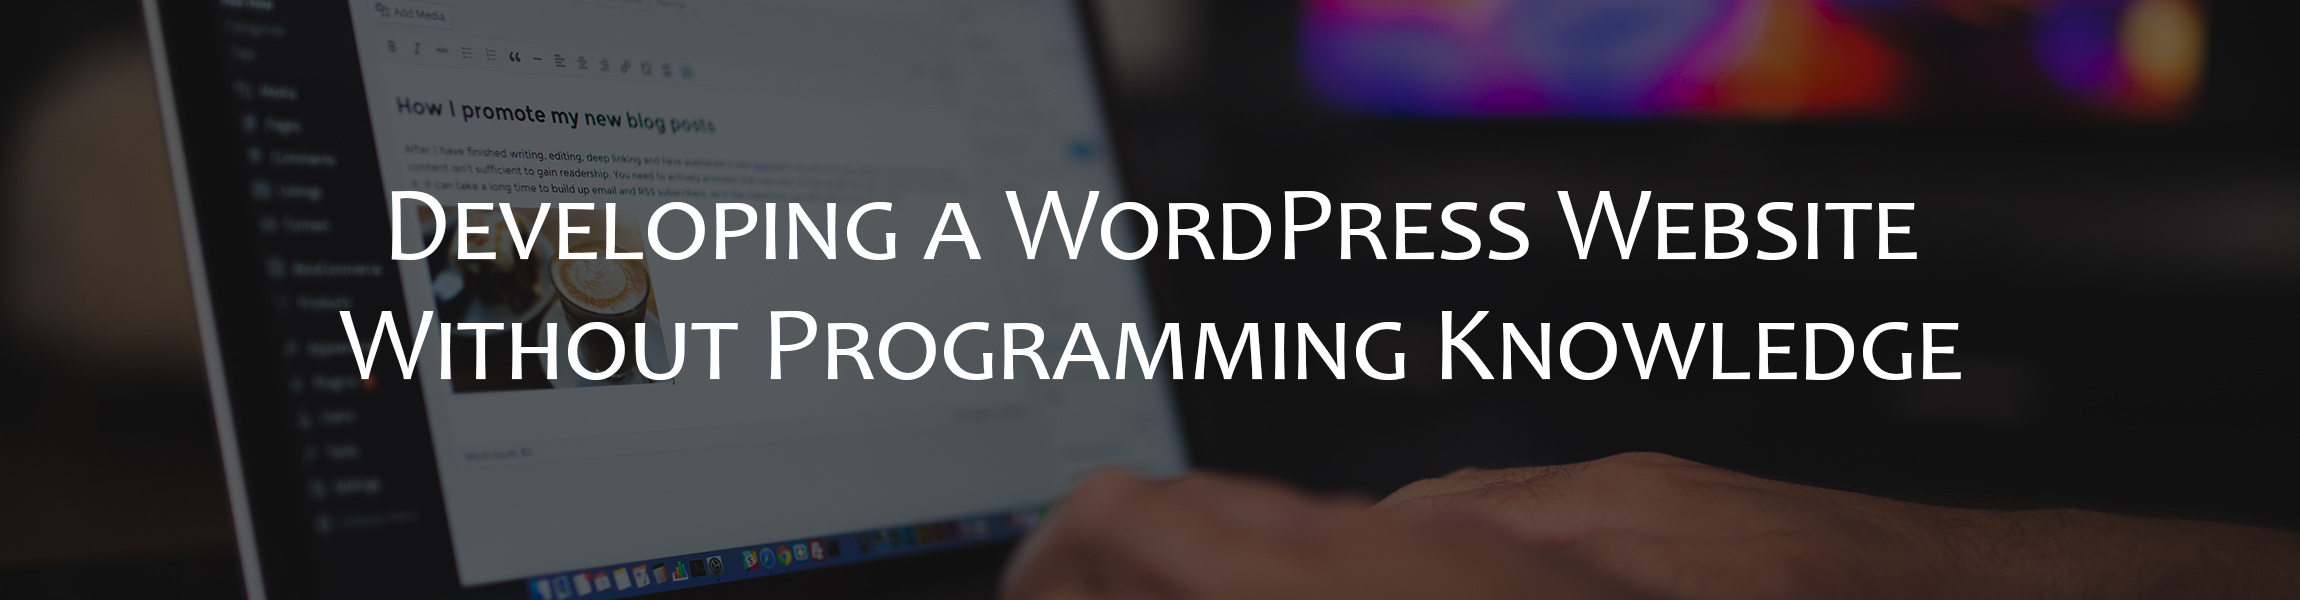 Developing a WordPress Website Without Programming Knowledge